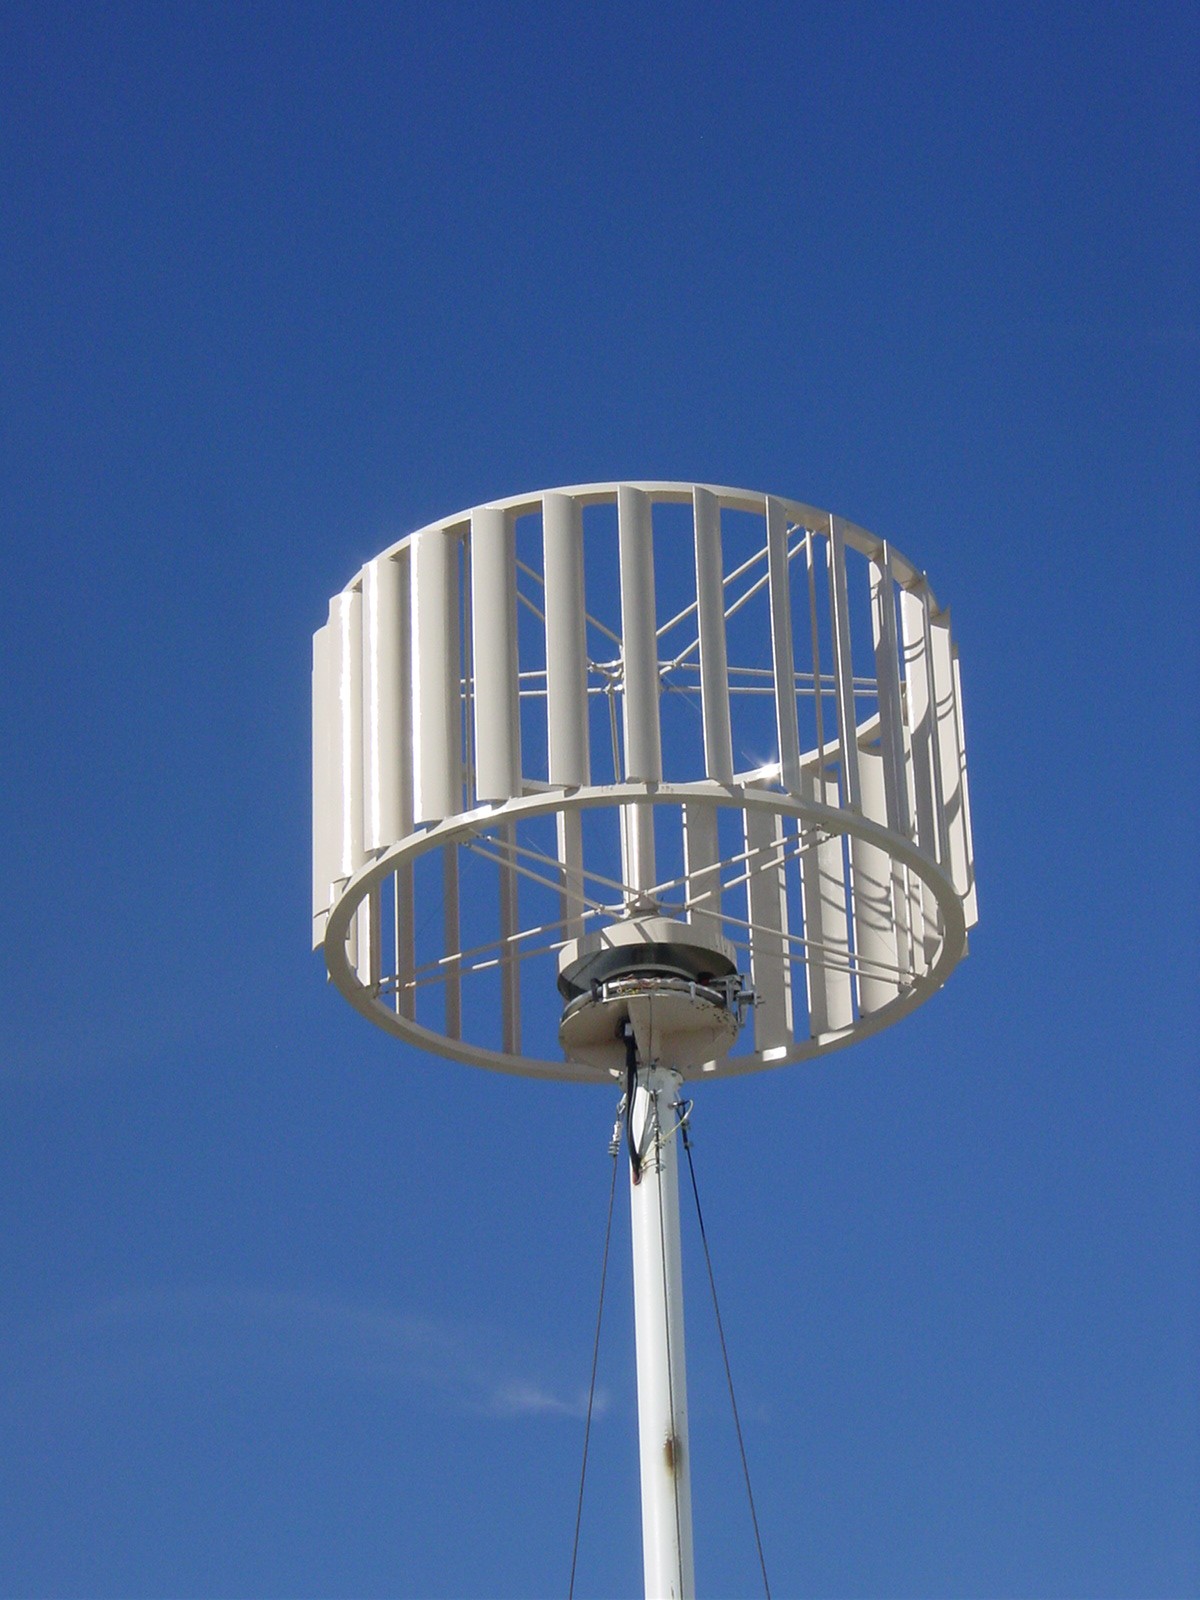 Vertical Axis Wind Turbine Vawt 5 Pictures to pin on Pinterest